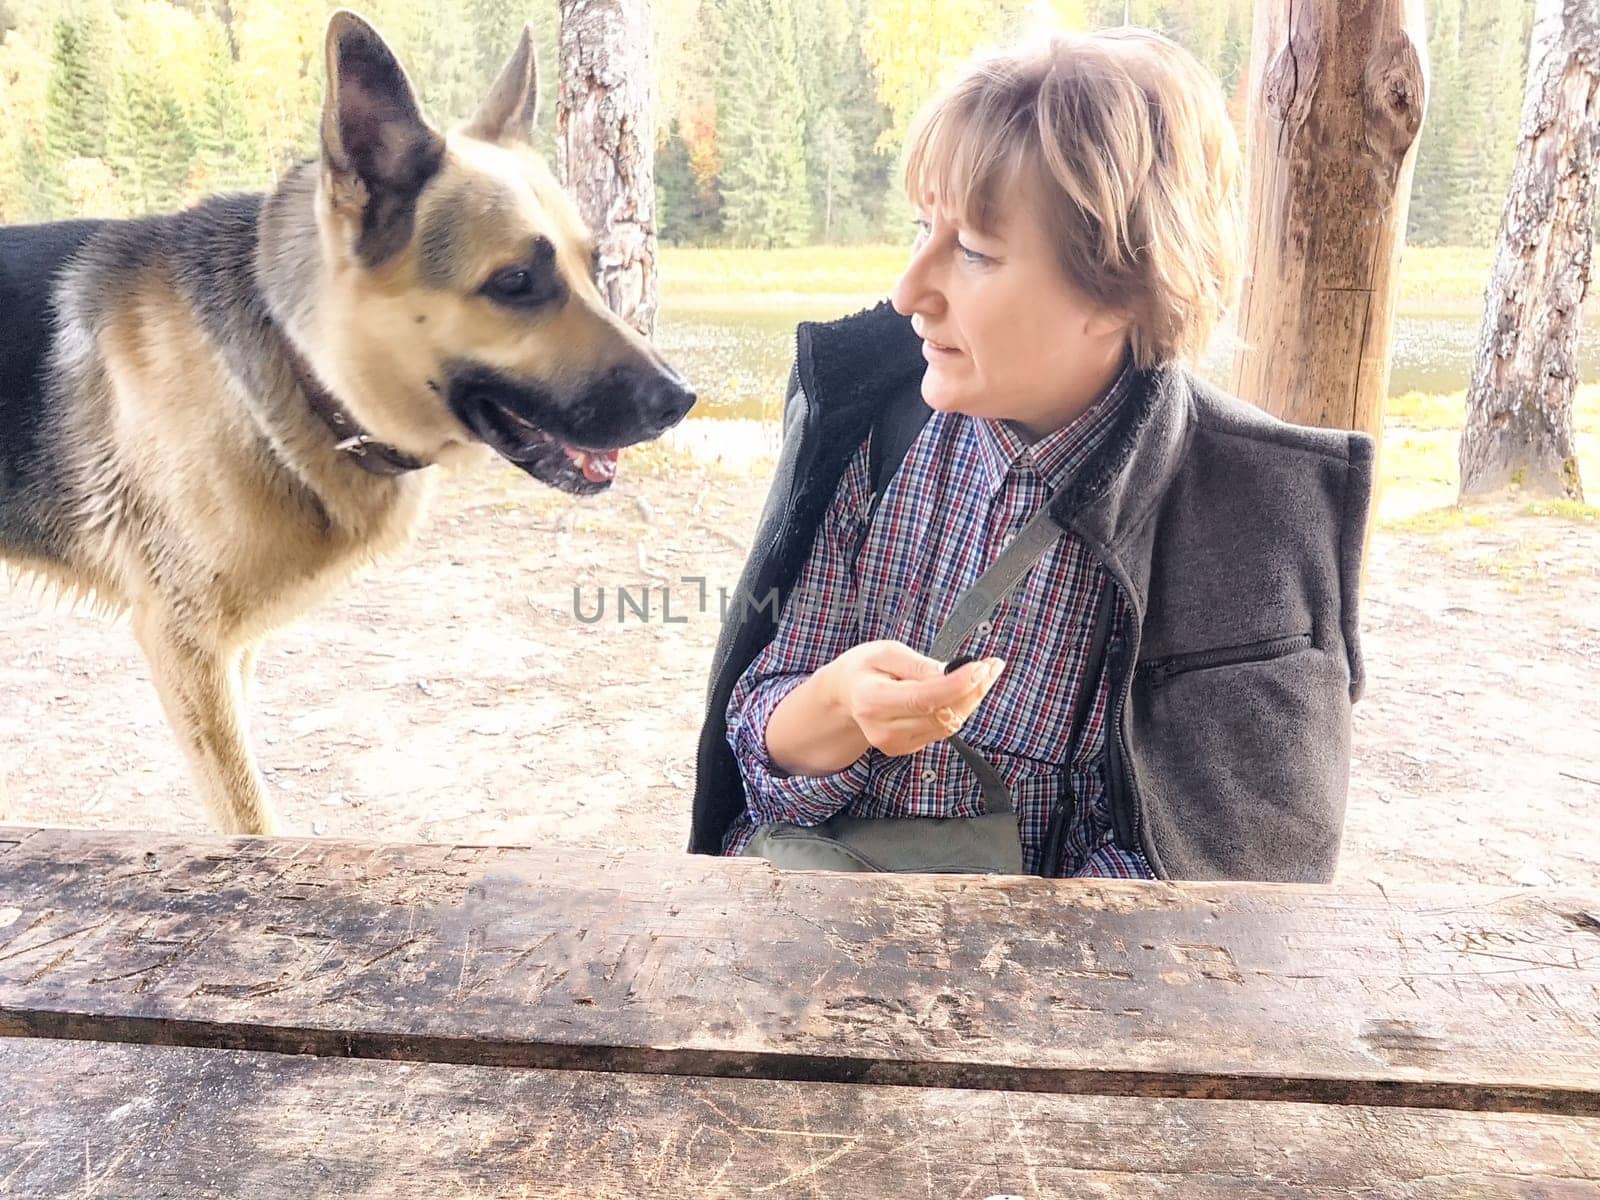 Girl treats a German Shepherd dog at a wooden table in nature. Mature middle aged woman with a pet